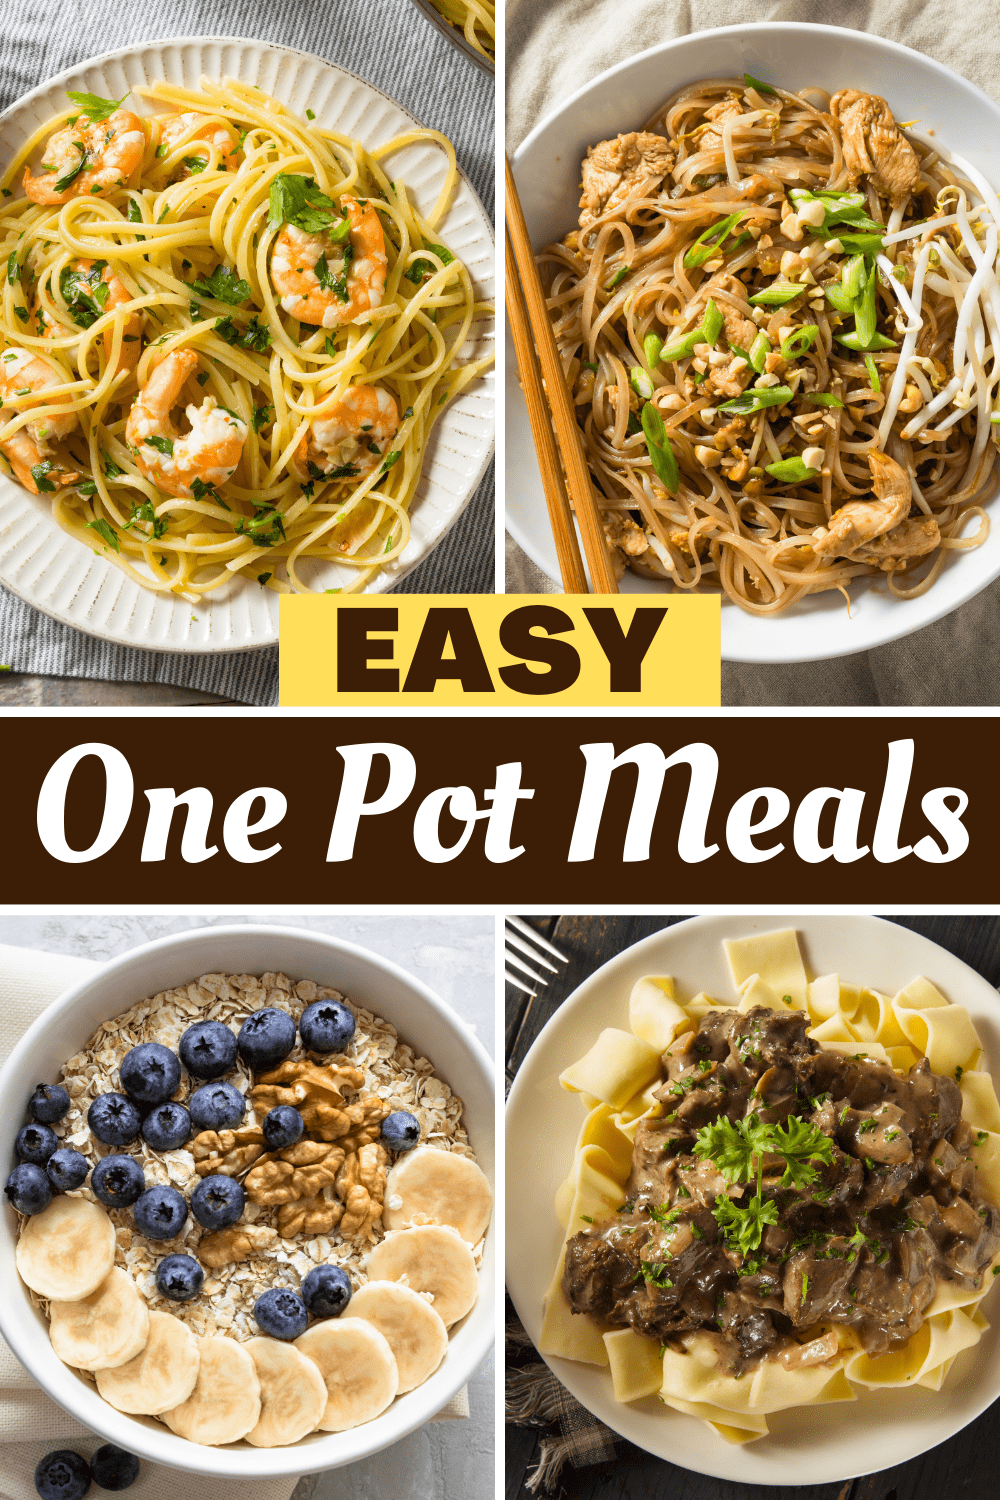 Easy One Pot Meals 1 